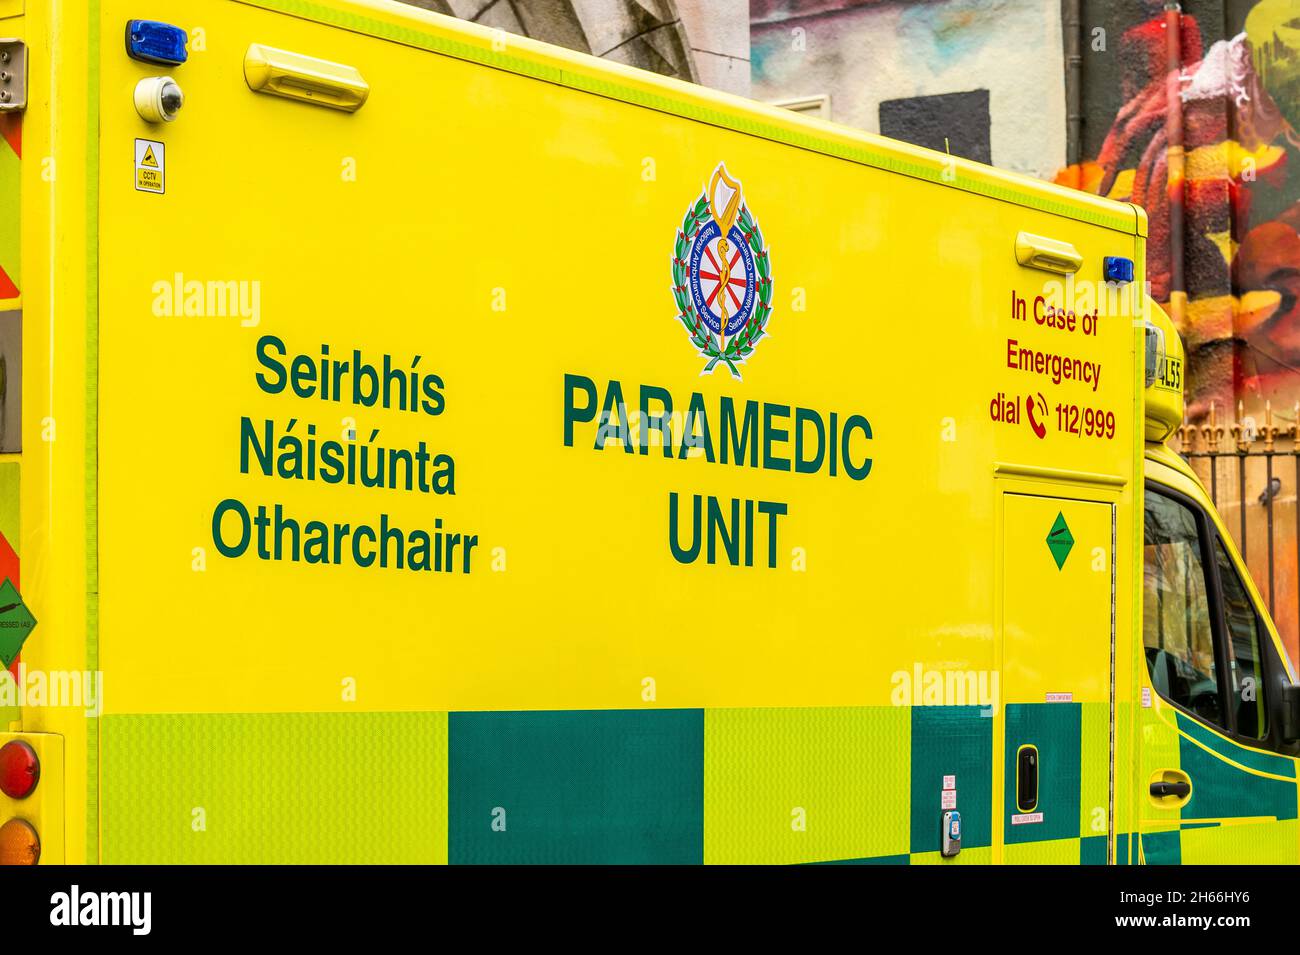 Irish ambulance with the words 'Paramedic Unit' on the exterior of the vehicle in Ireland. Stock Photo